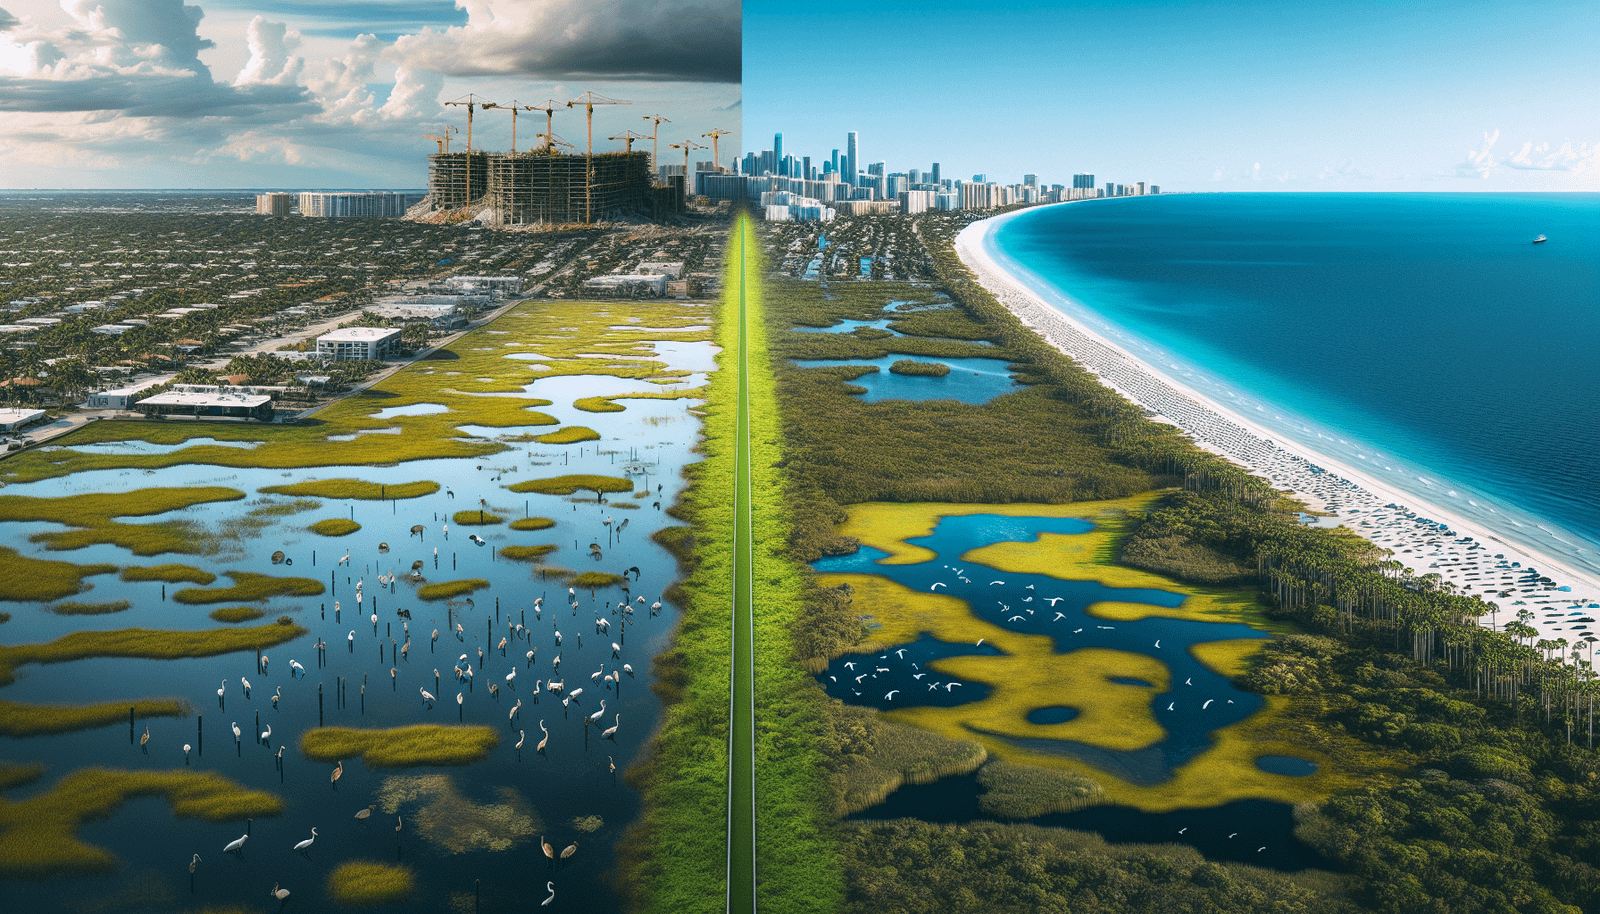 Human interaction with Florida's natural landscape